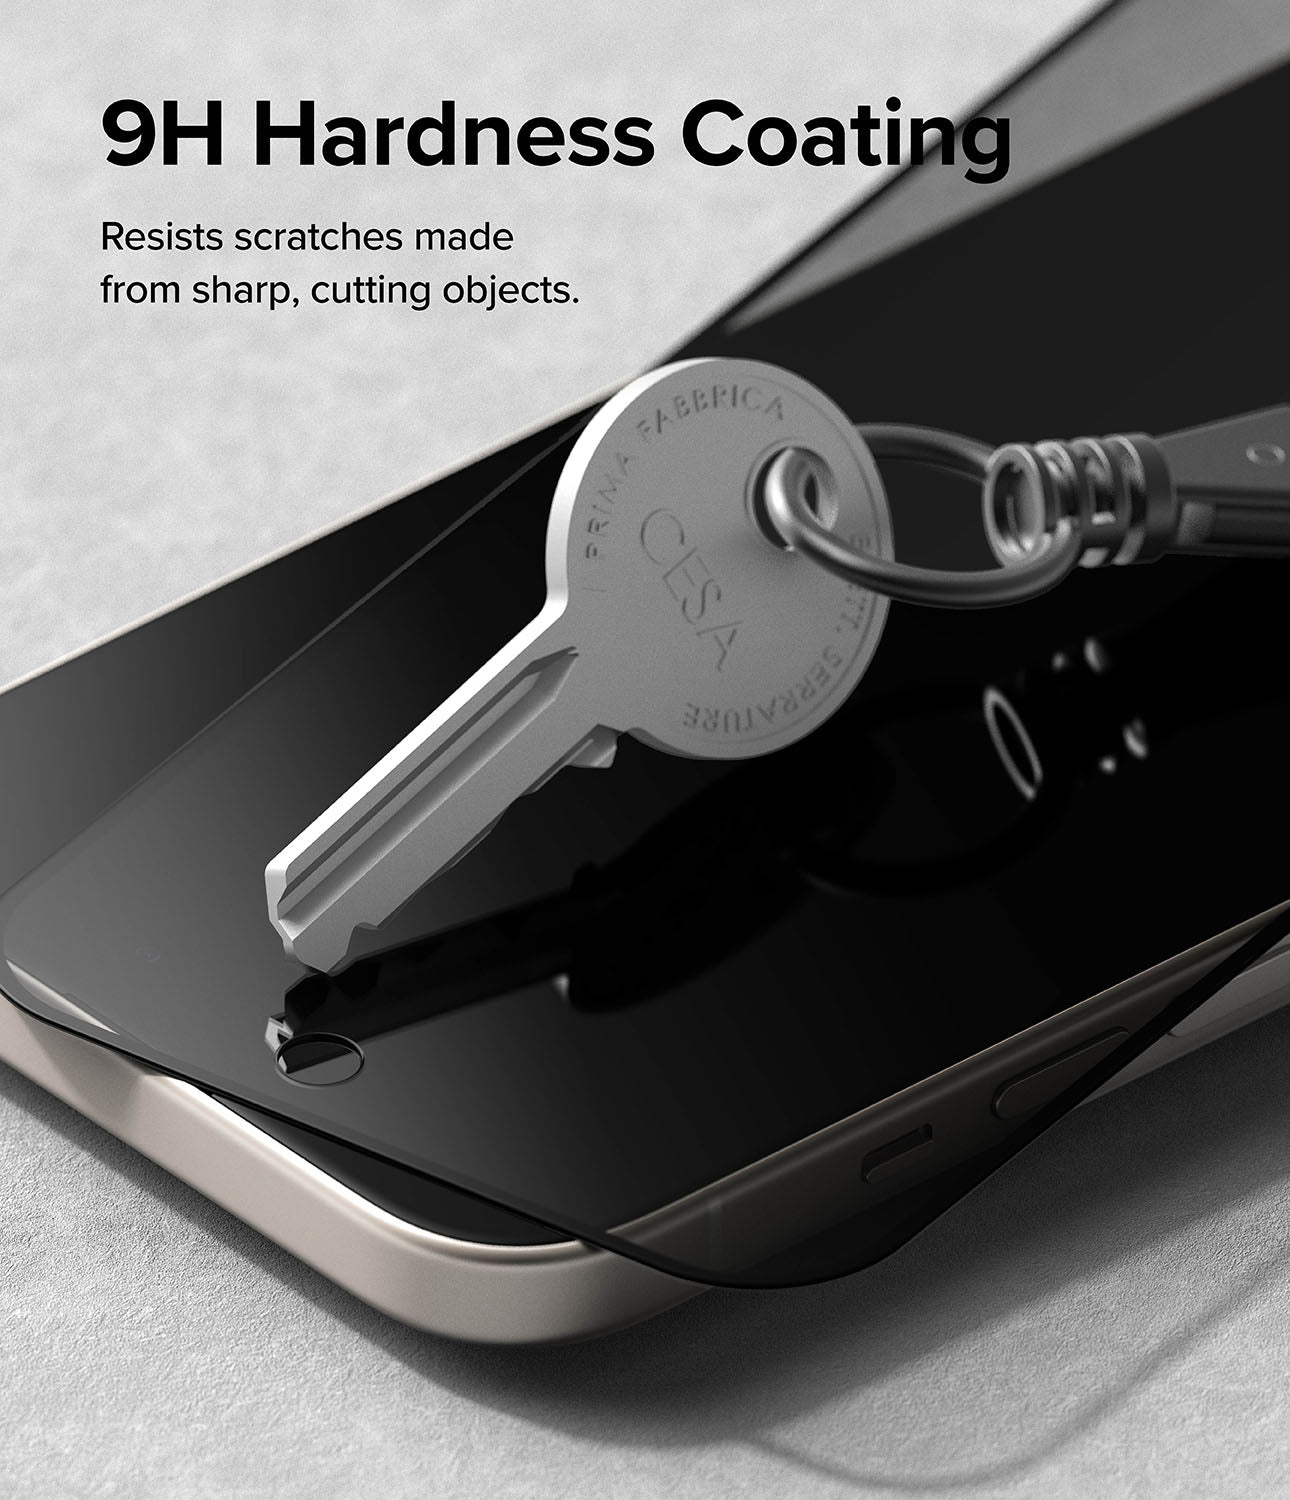 iPhone 15 Screen Protector | Privacy Glass - 9H Hardness Coating. Resists scratches made from sharp, cutting objects.